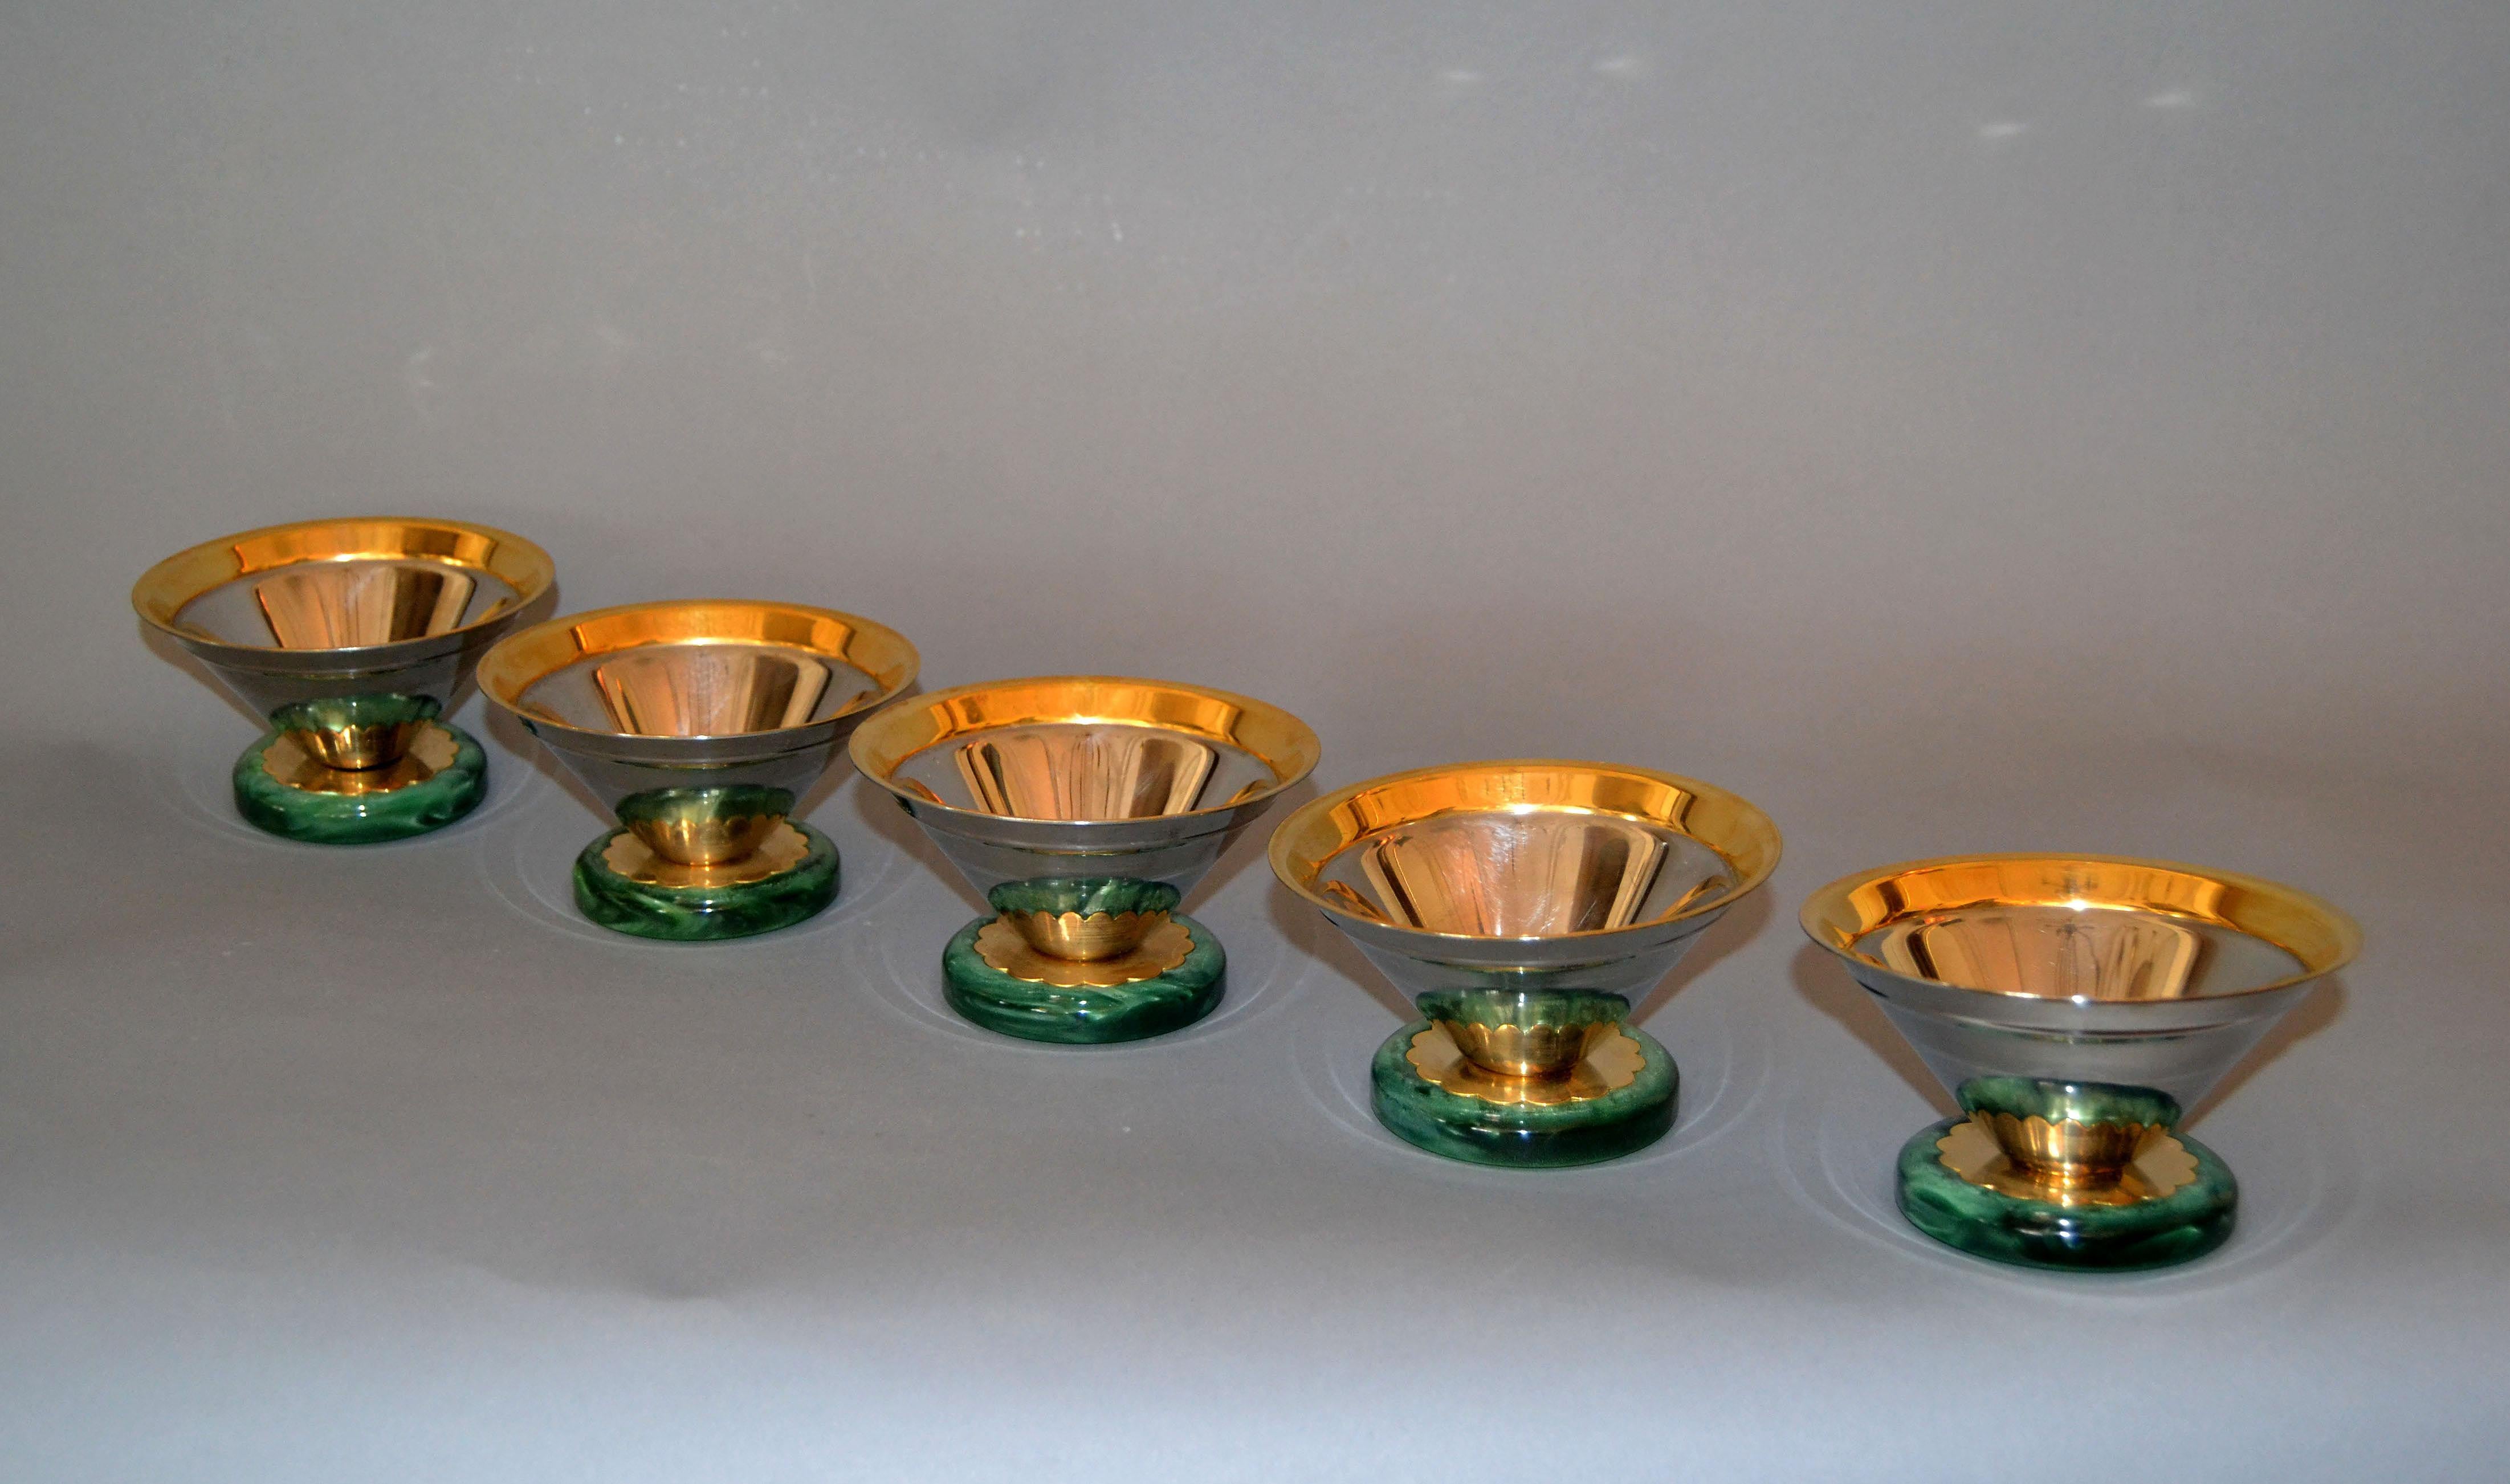 Art Deco style ice cream cups for 5 People.
Cups in 18-10 stainless steel and finished in pure gold leaf with a base made out of malachite.
Designed by F. Tibaldo for Gottinghen.
Each cup is marked.